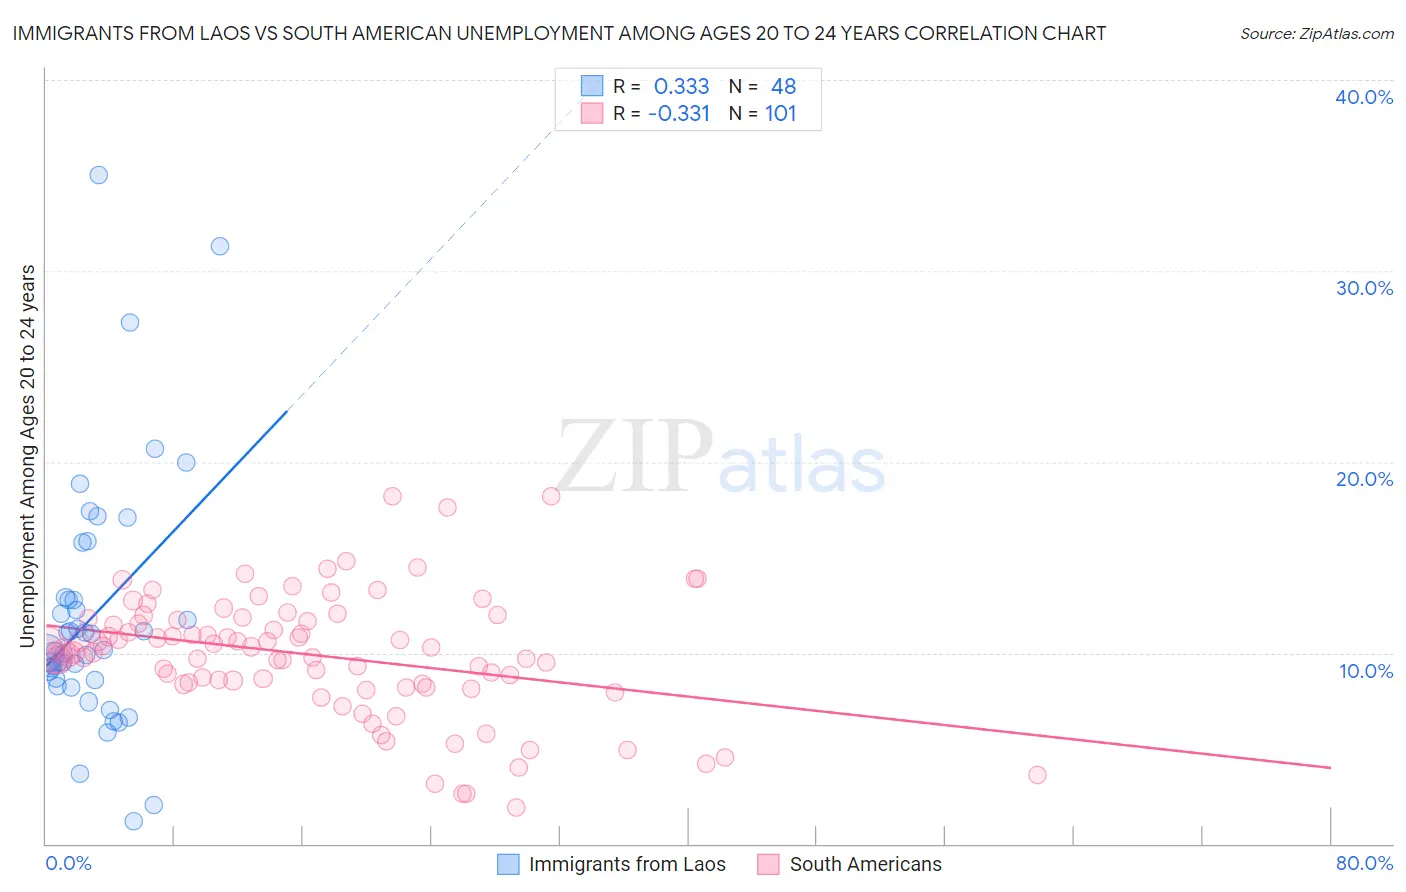 Immigrants from Laos vs South American Unemployment Among Ages 20 to 24 years